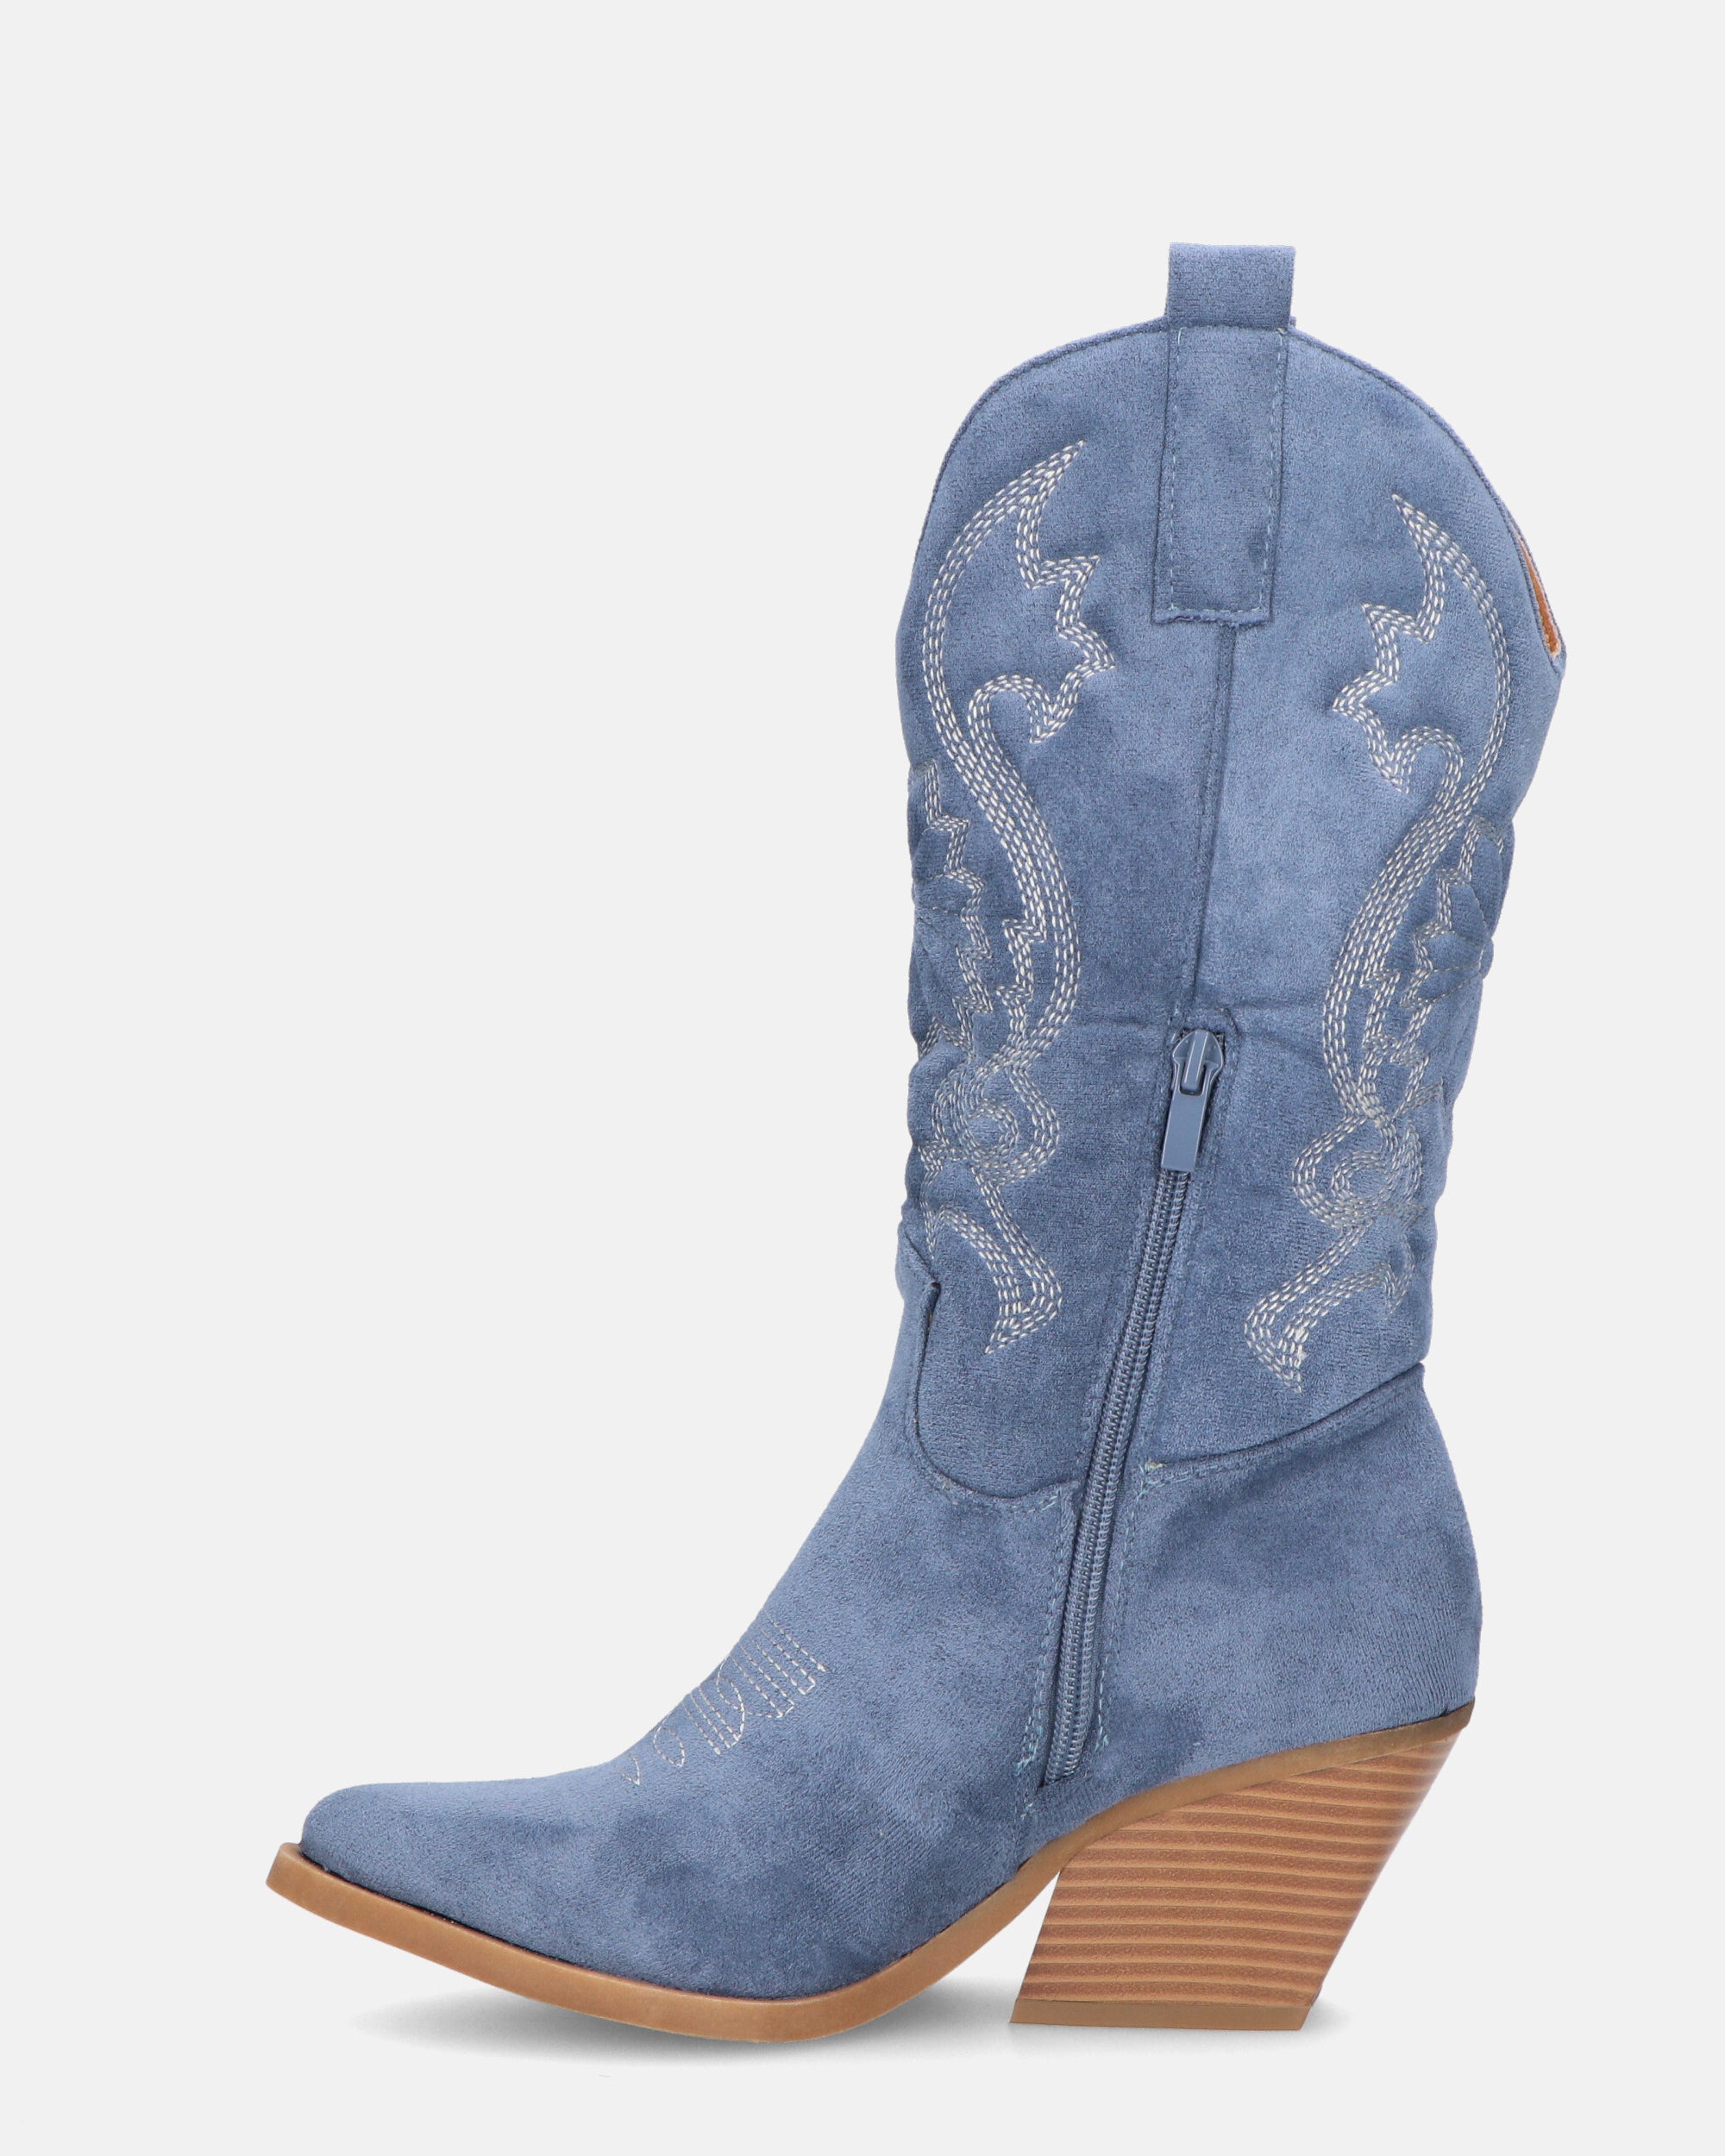 VITA - blue suede camperos with embroidery and zip